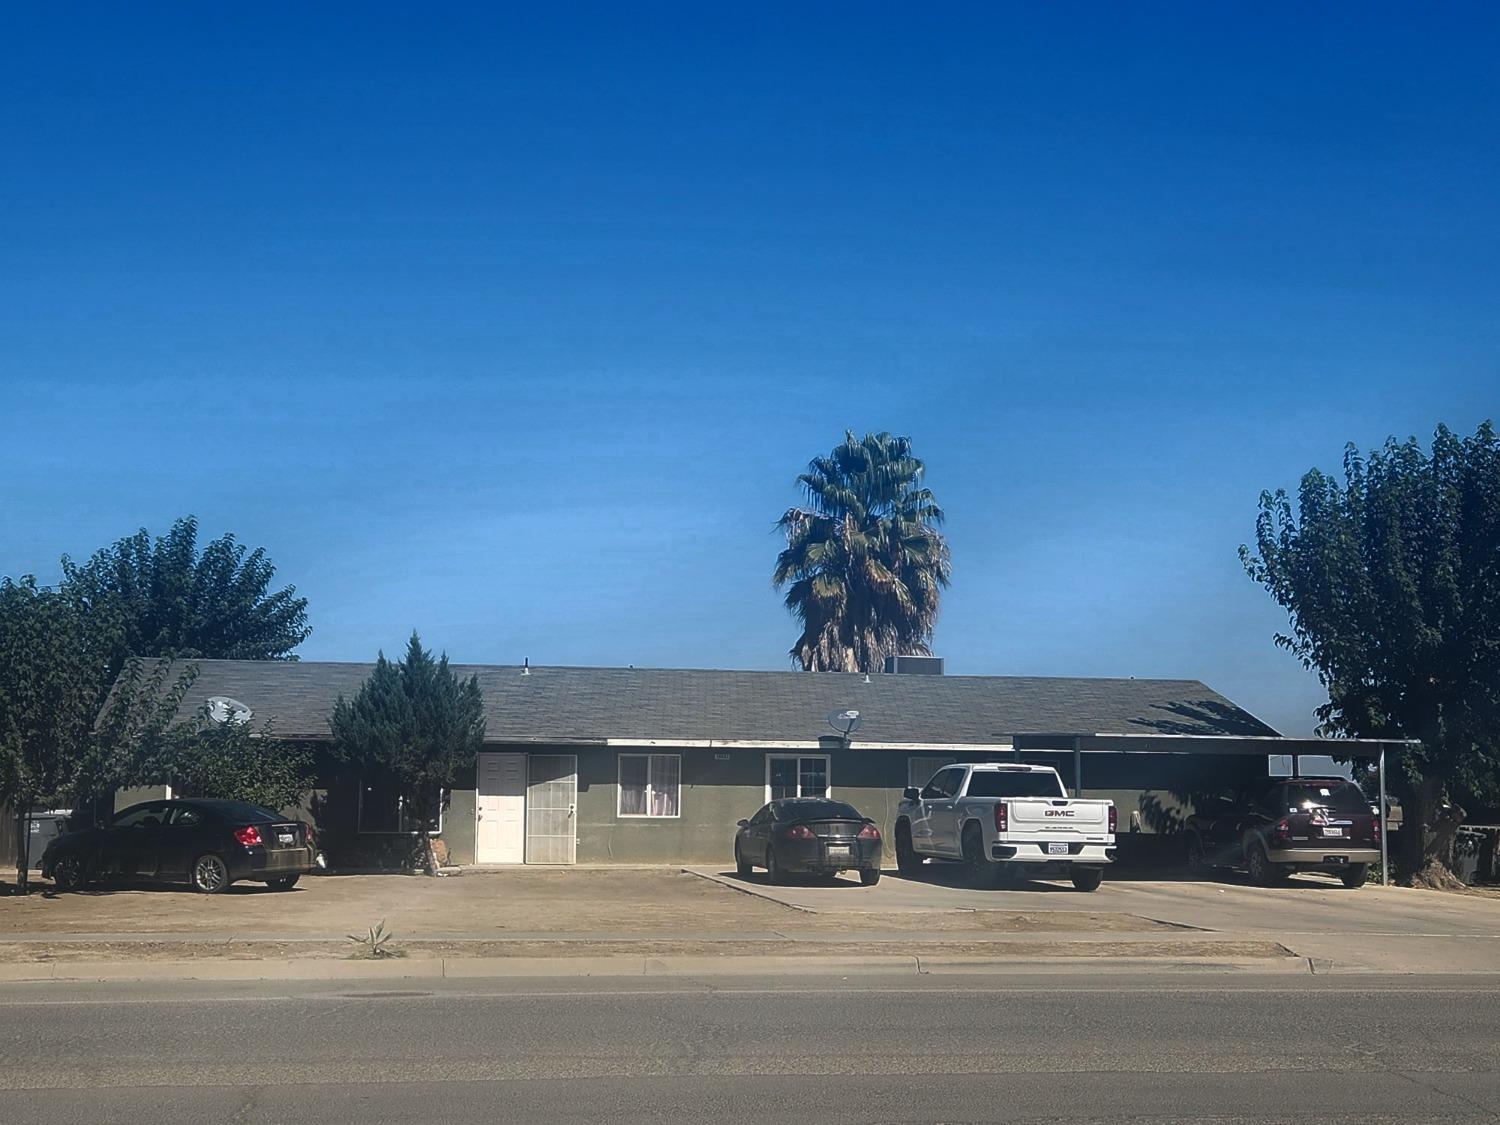 Photo of 16682 W Palmer Ave in Huron, CA